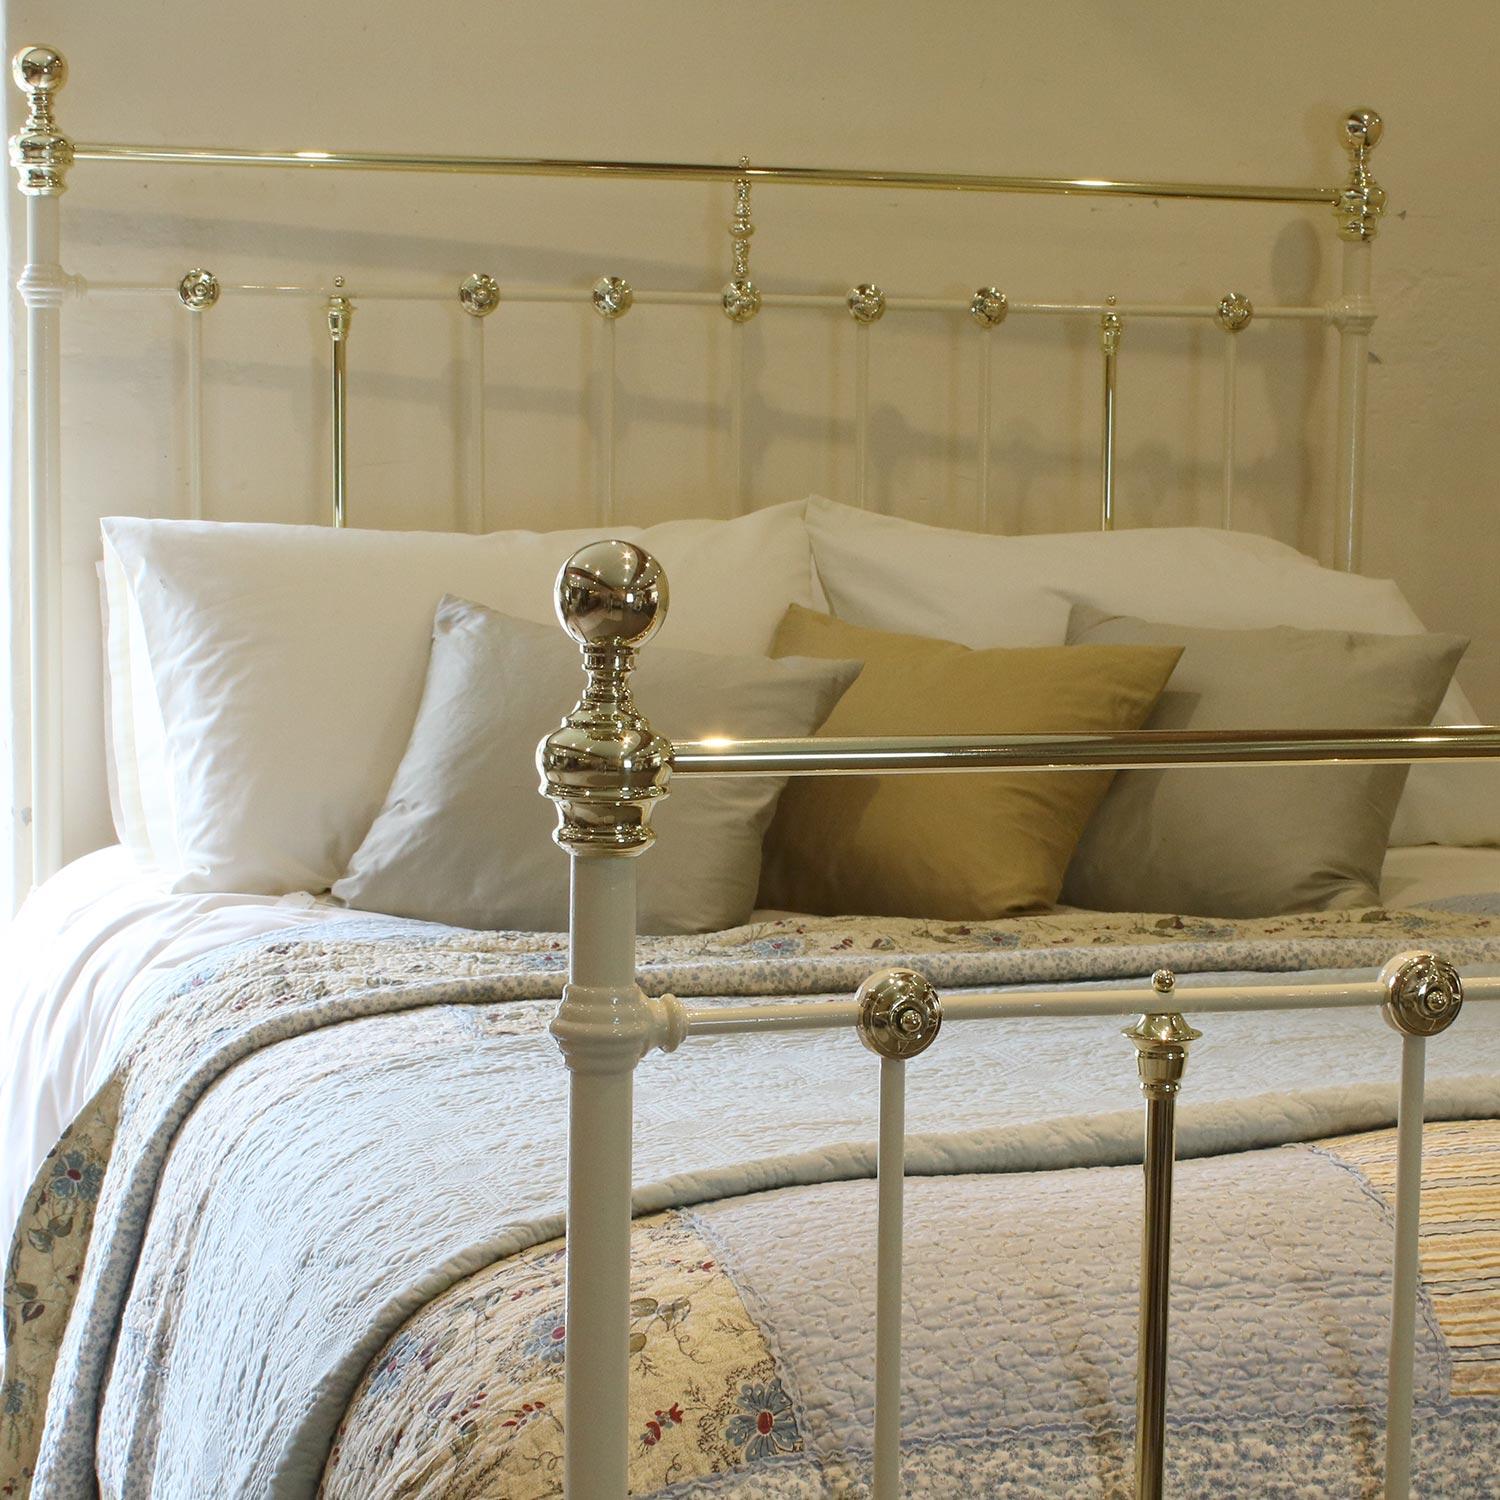 Victorian Decorative Brass and Iron Bed, MK149